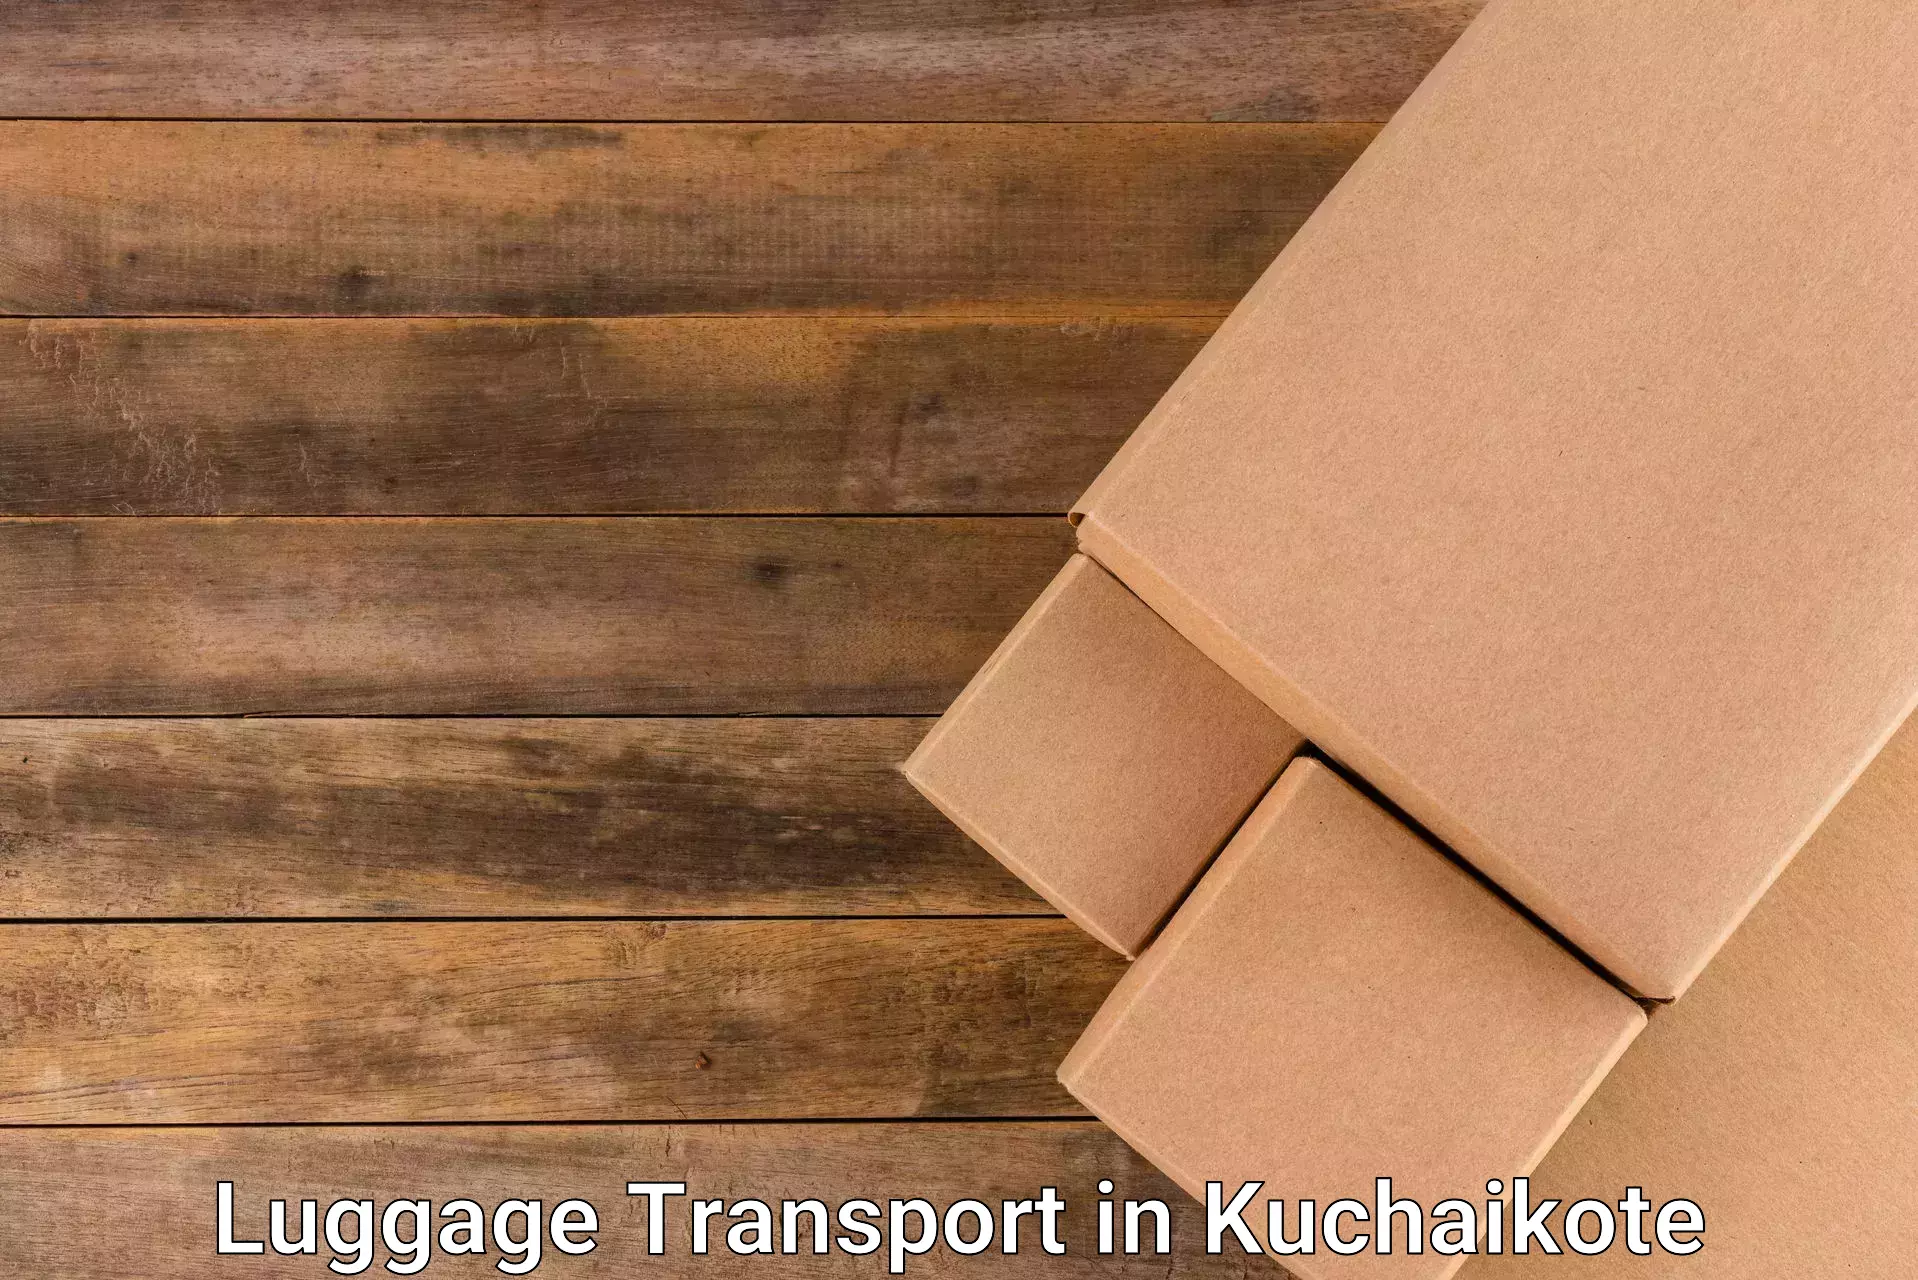 Luggage shipping trends in Kuchaikote